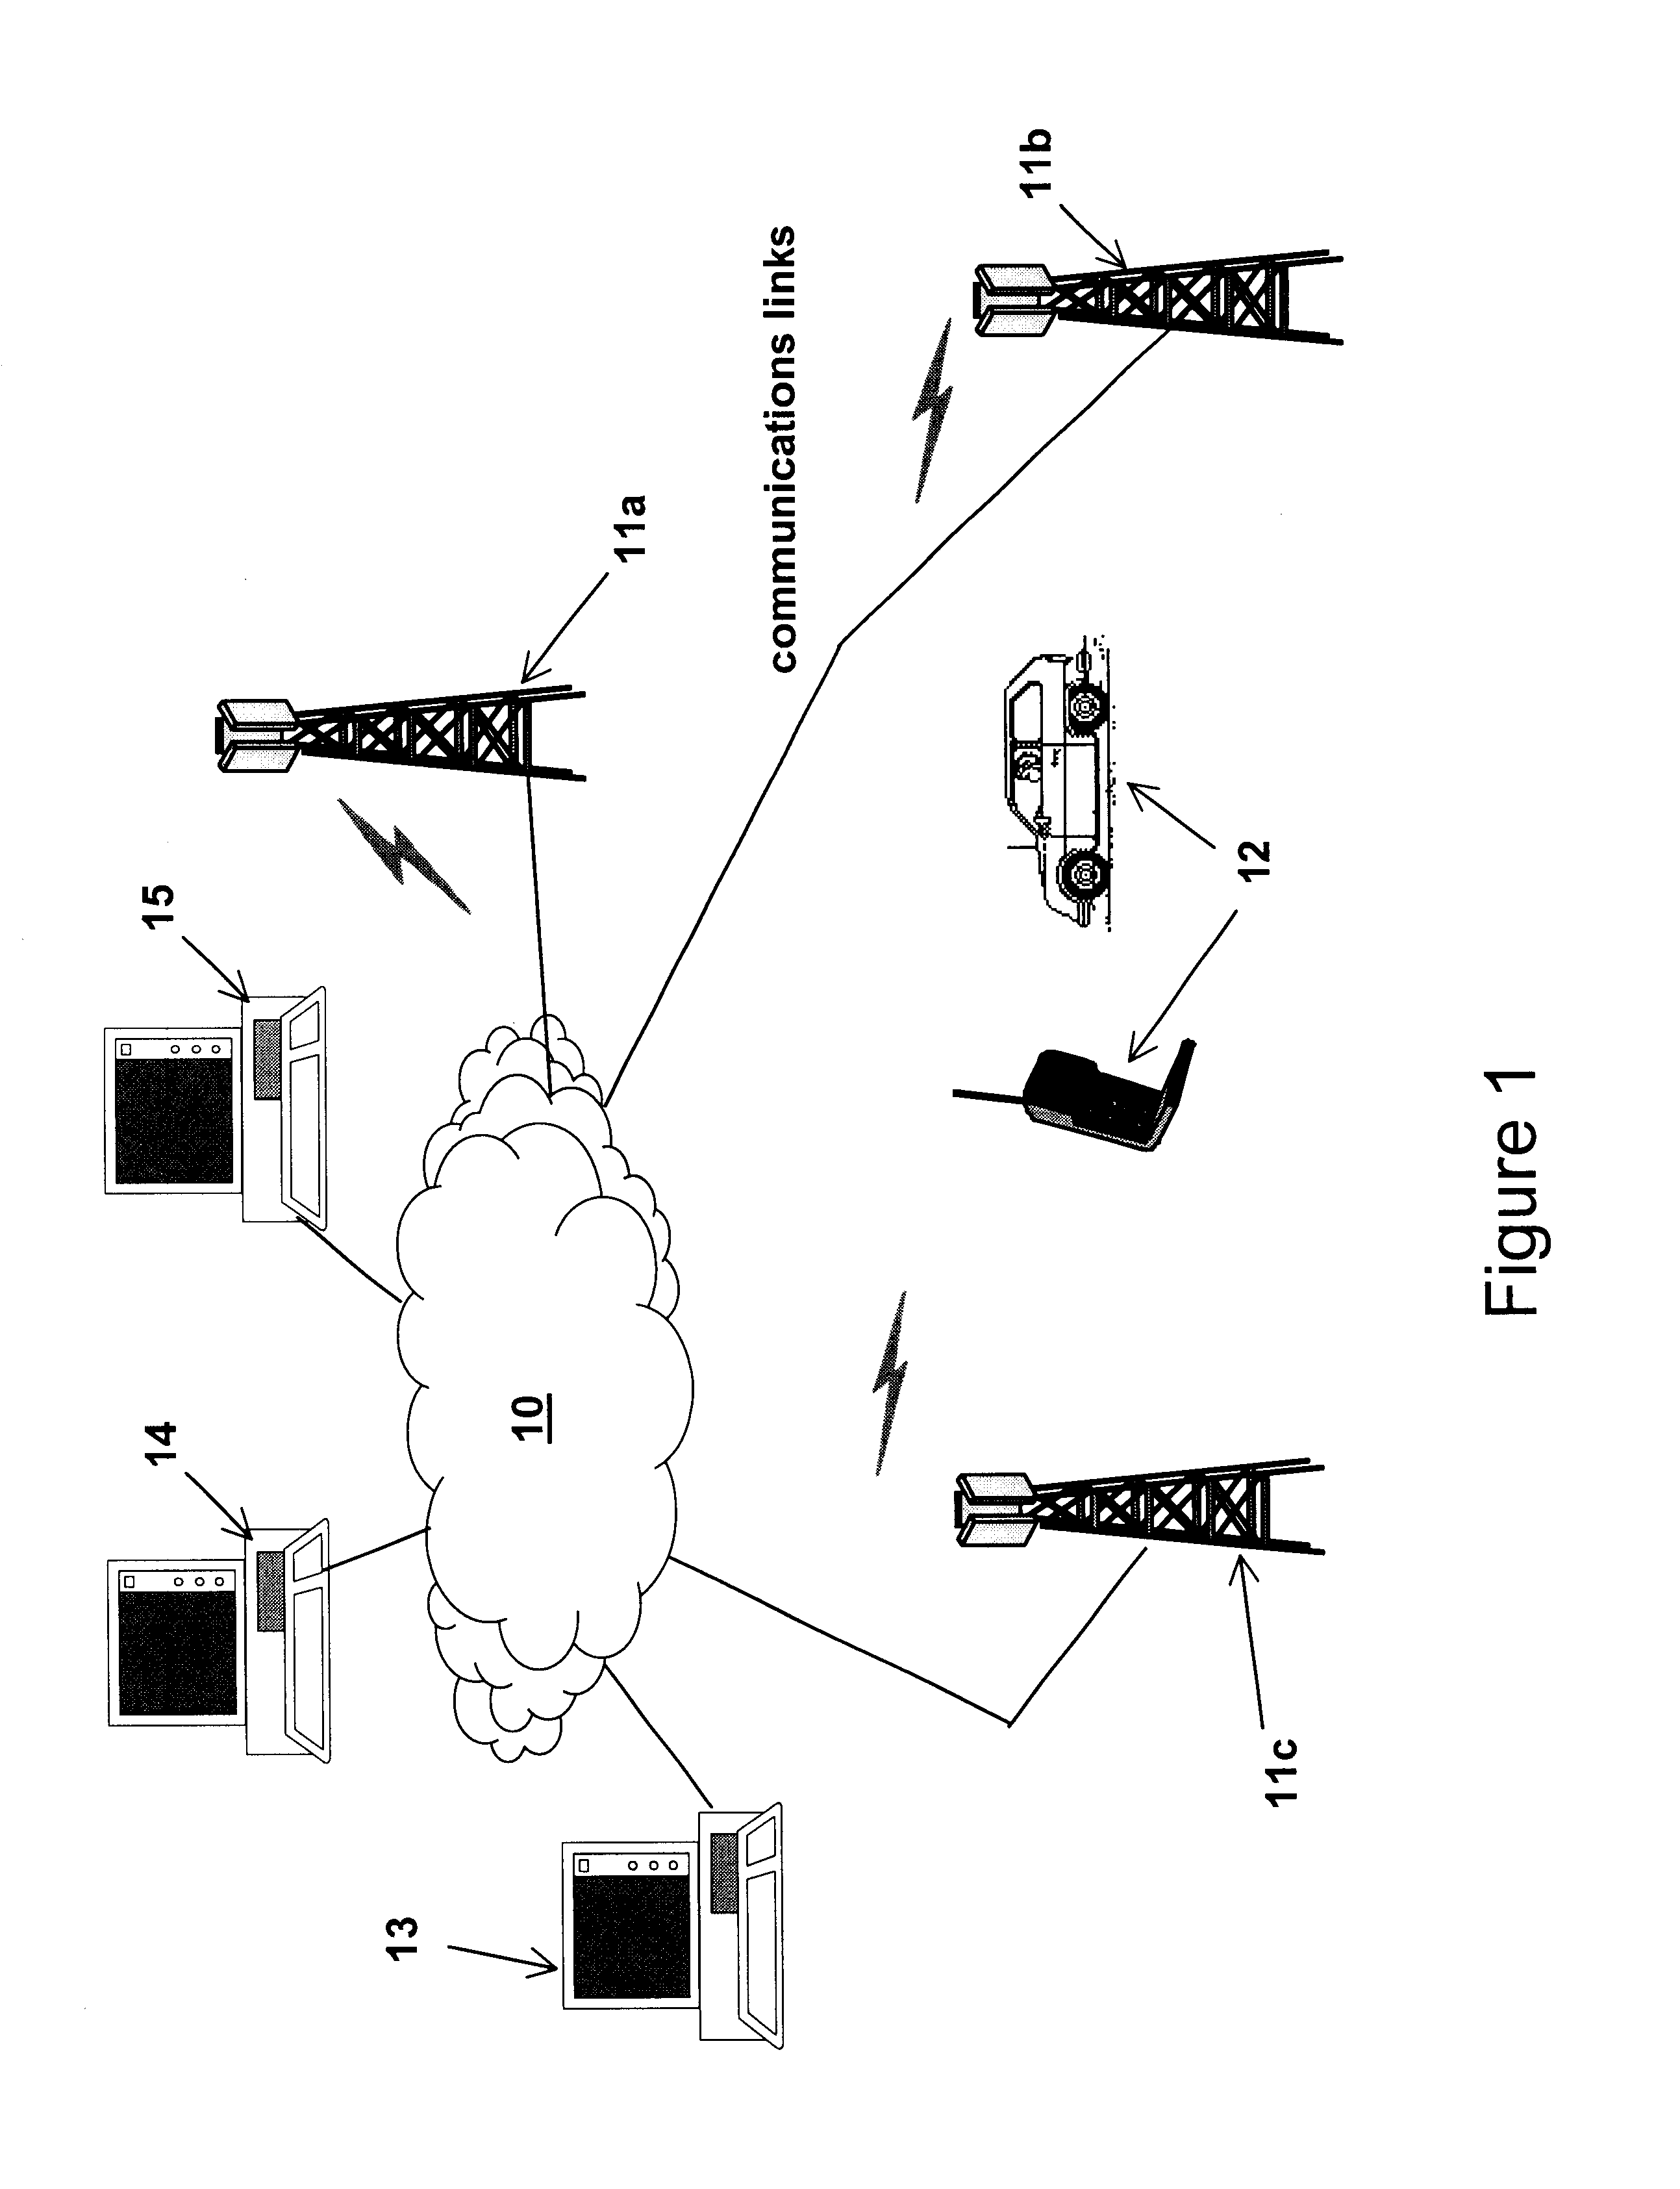 Location based power control for mobile communications systems